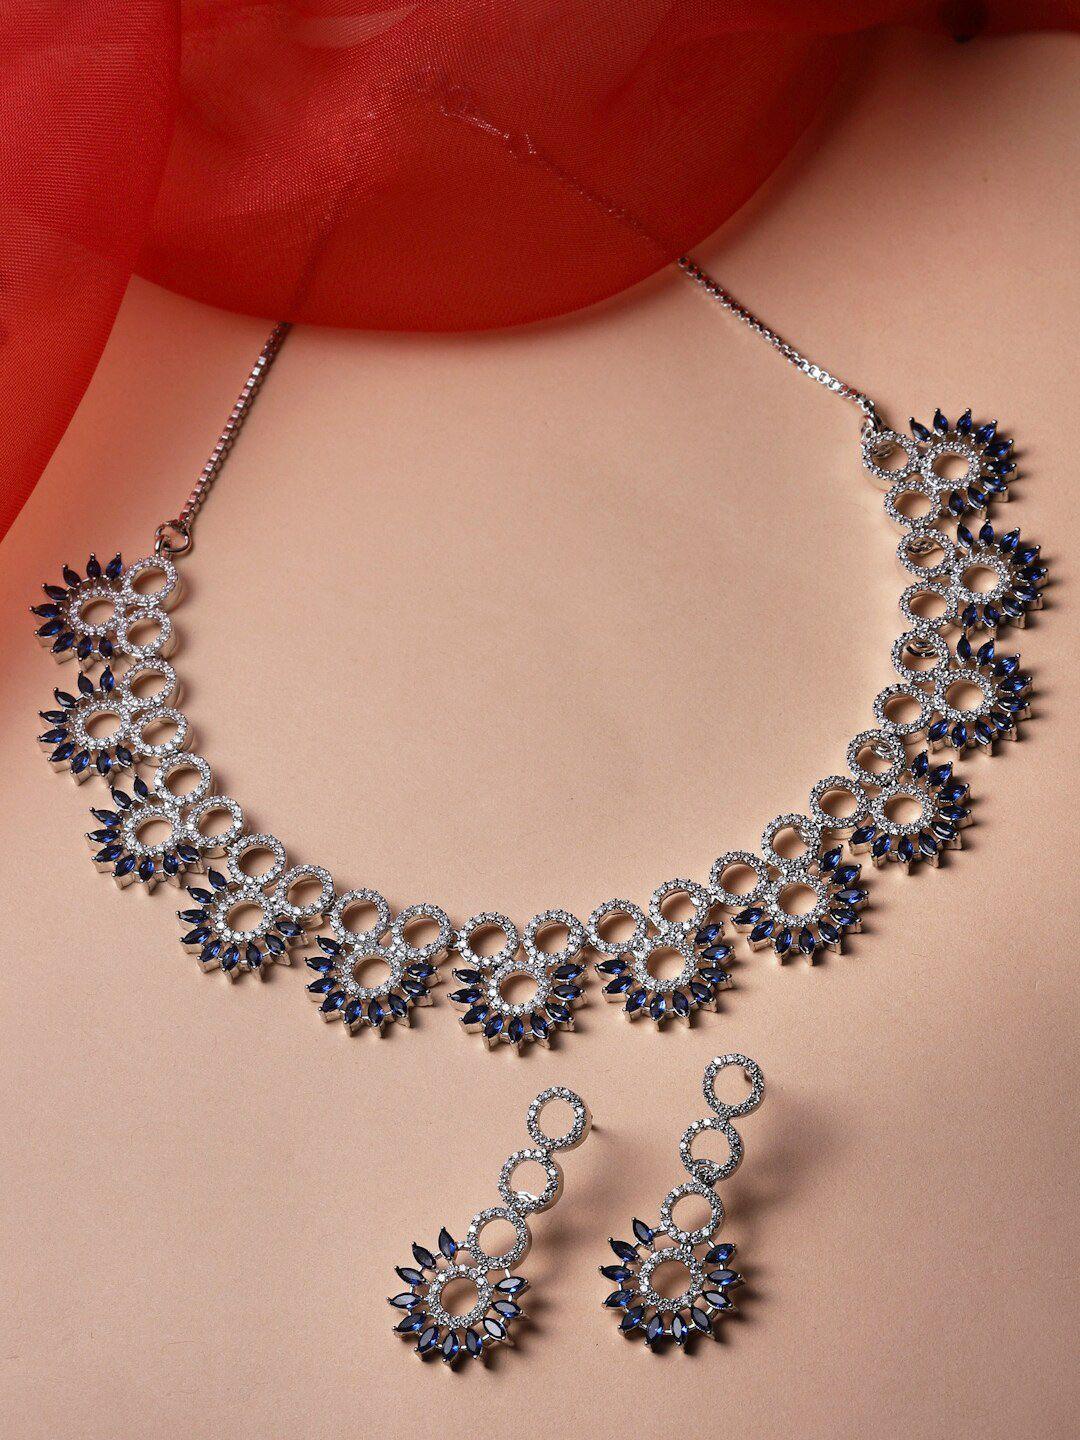 zeneme rhodium-plated american diamond studded necklace and earrings